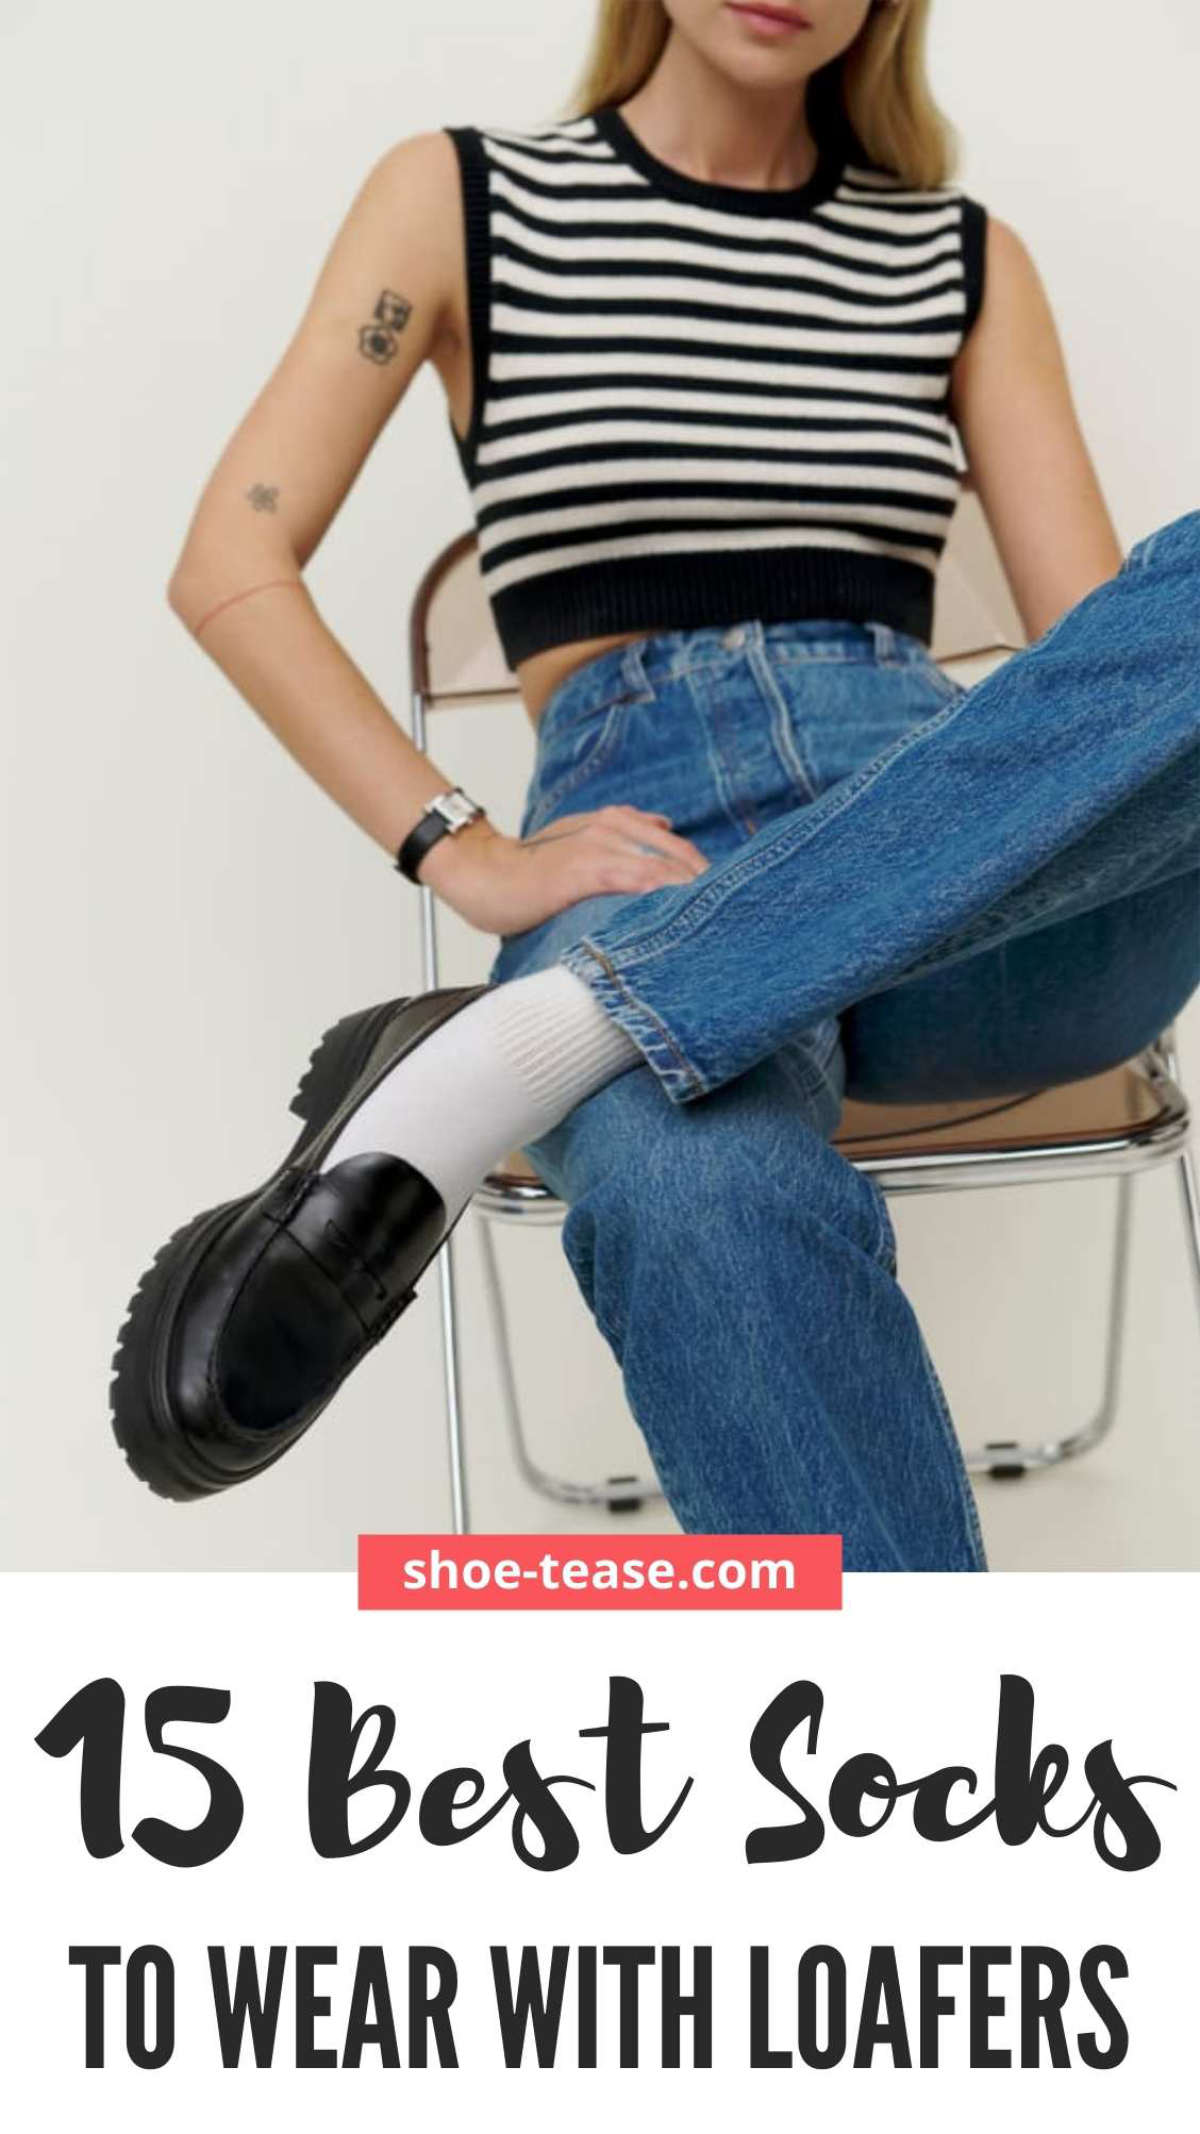 Text reading 14 best socks to wear with loafers under close up of woman sitting on chair wearing white socks with black loafers, straight leg jeans and a black and white striped cropped vest.